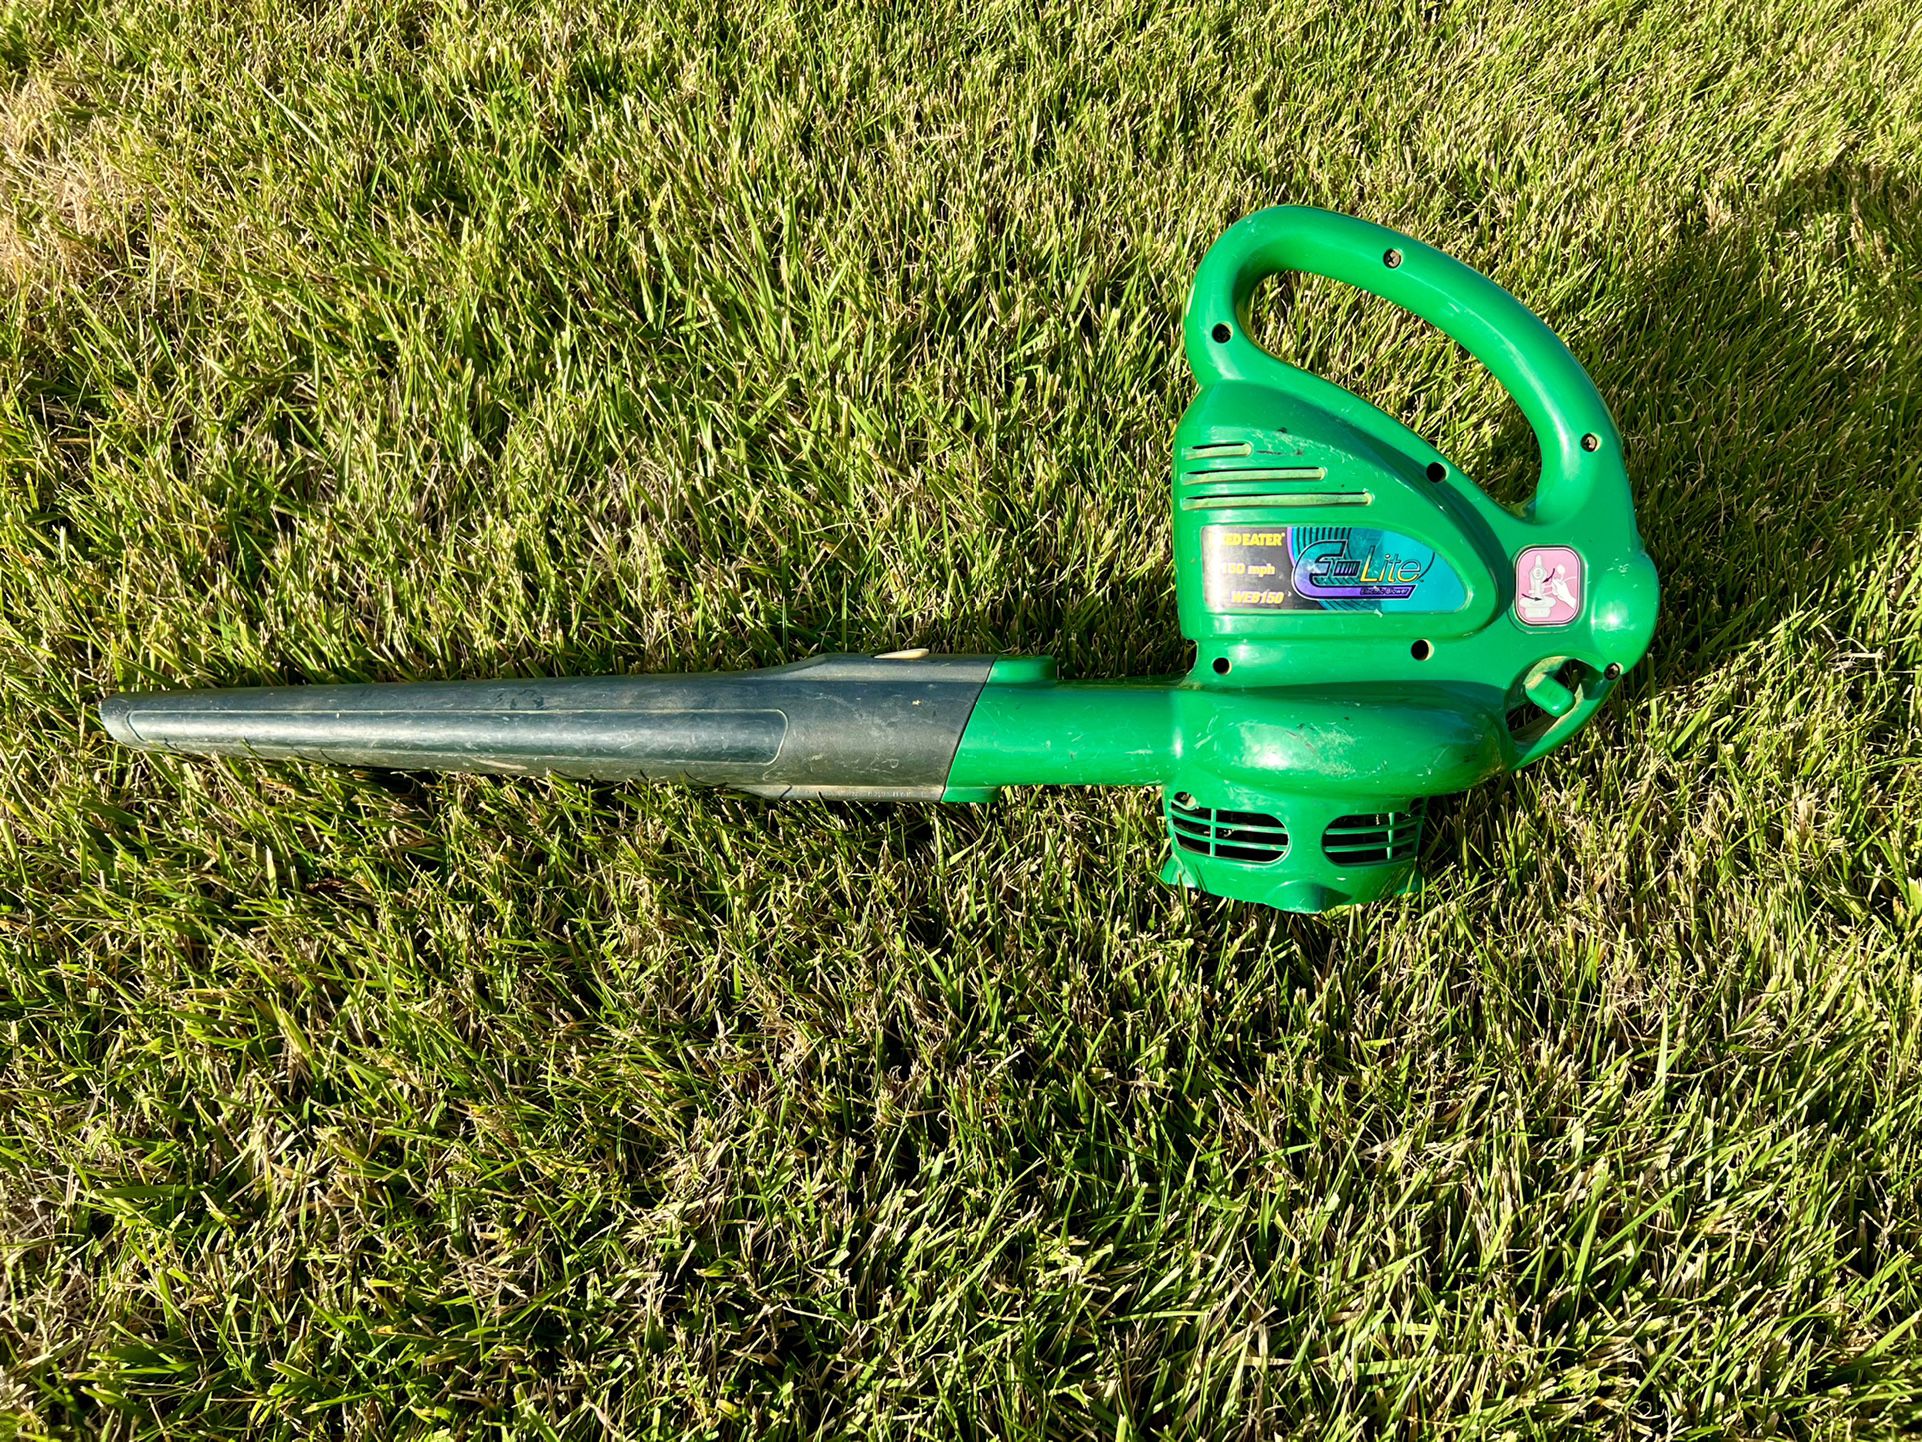 Leaf Blower Mph-150 Corded Electric